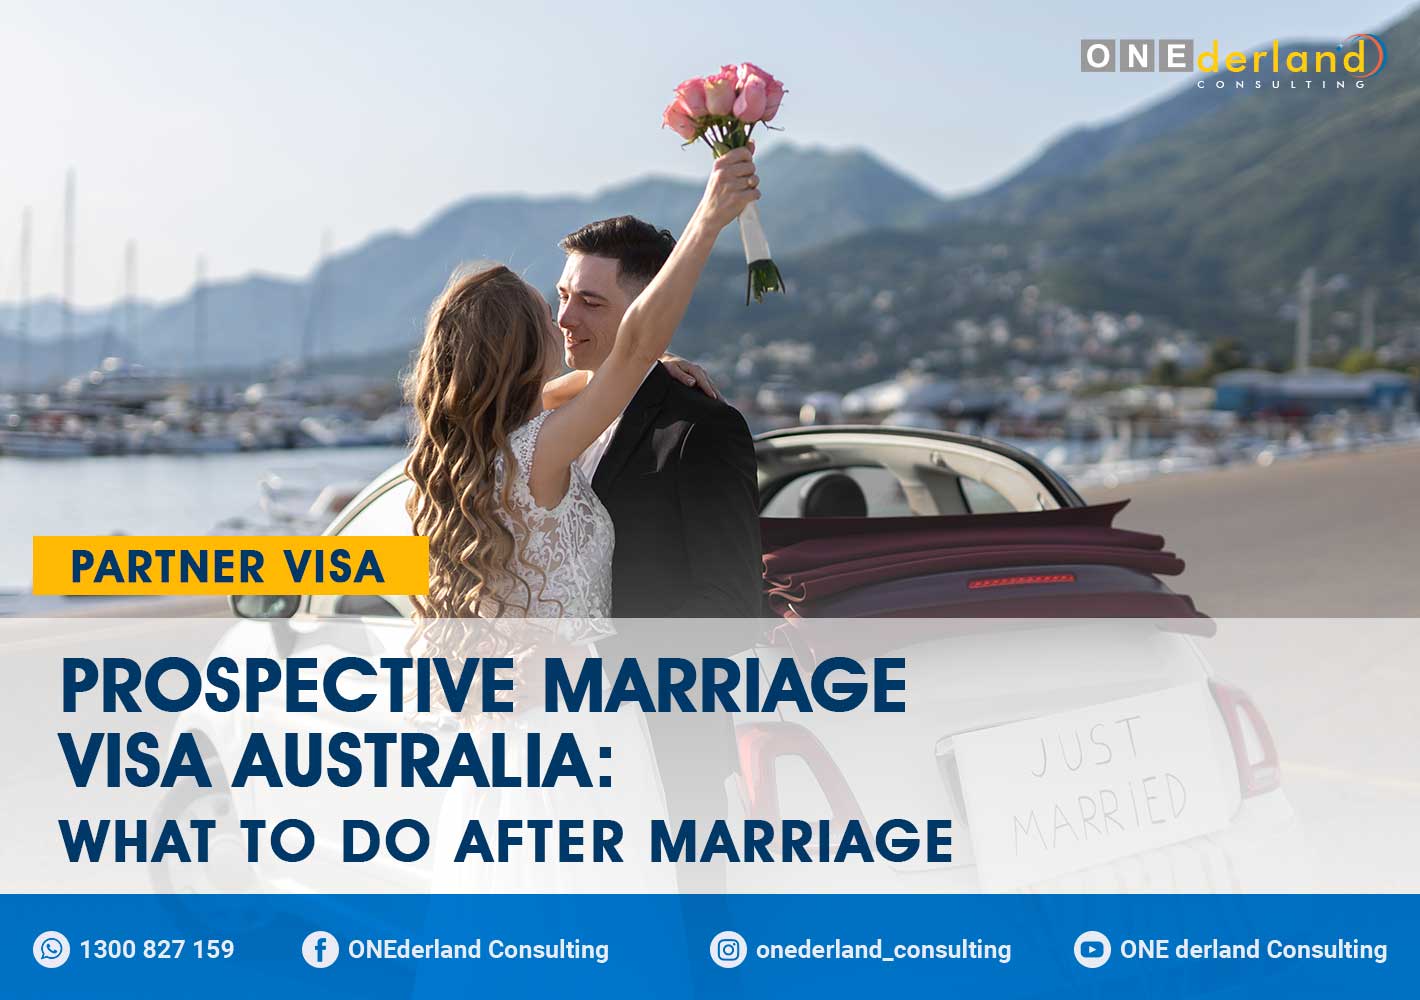 Important Information: Next Steps After Getting Married on Prospective Marriage Visa